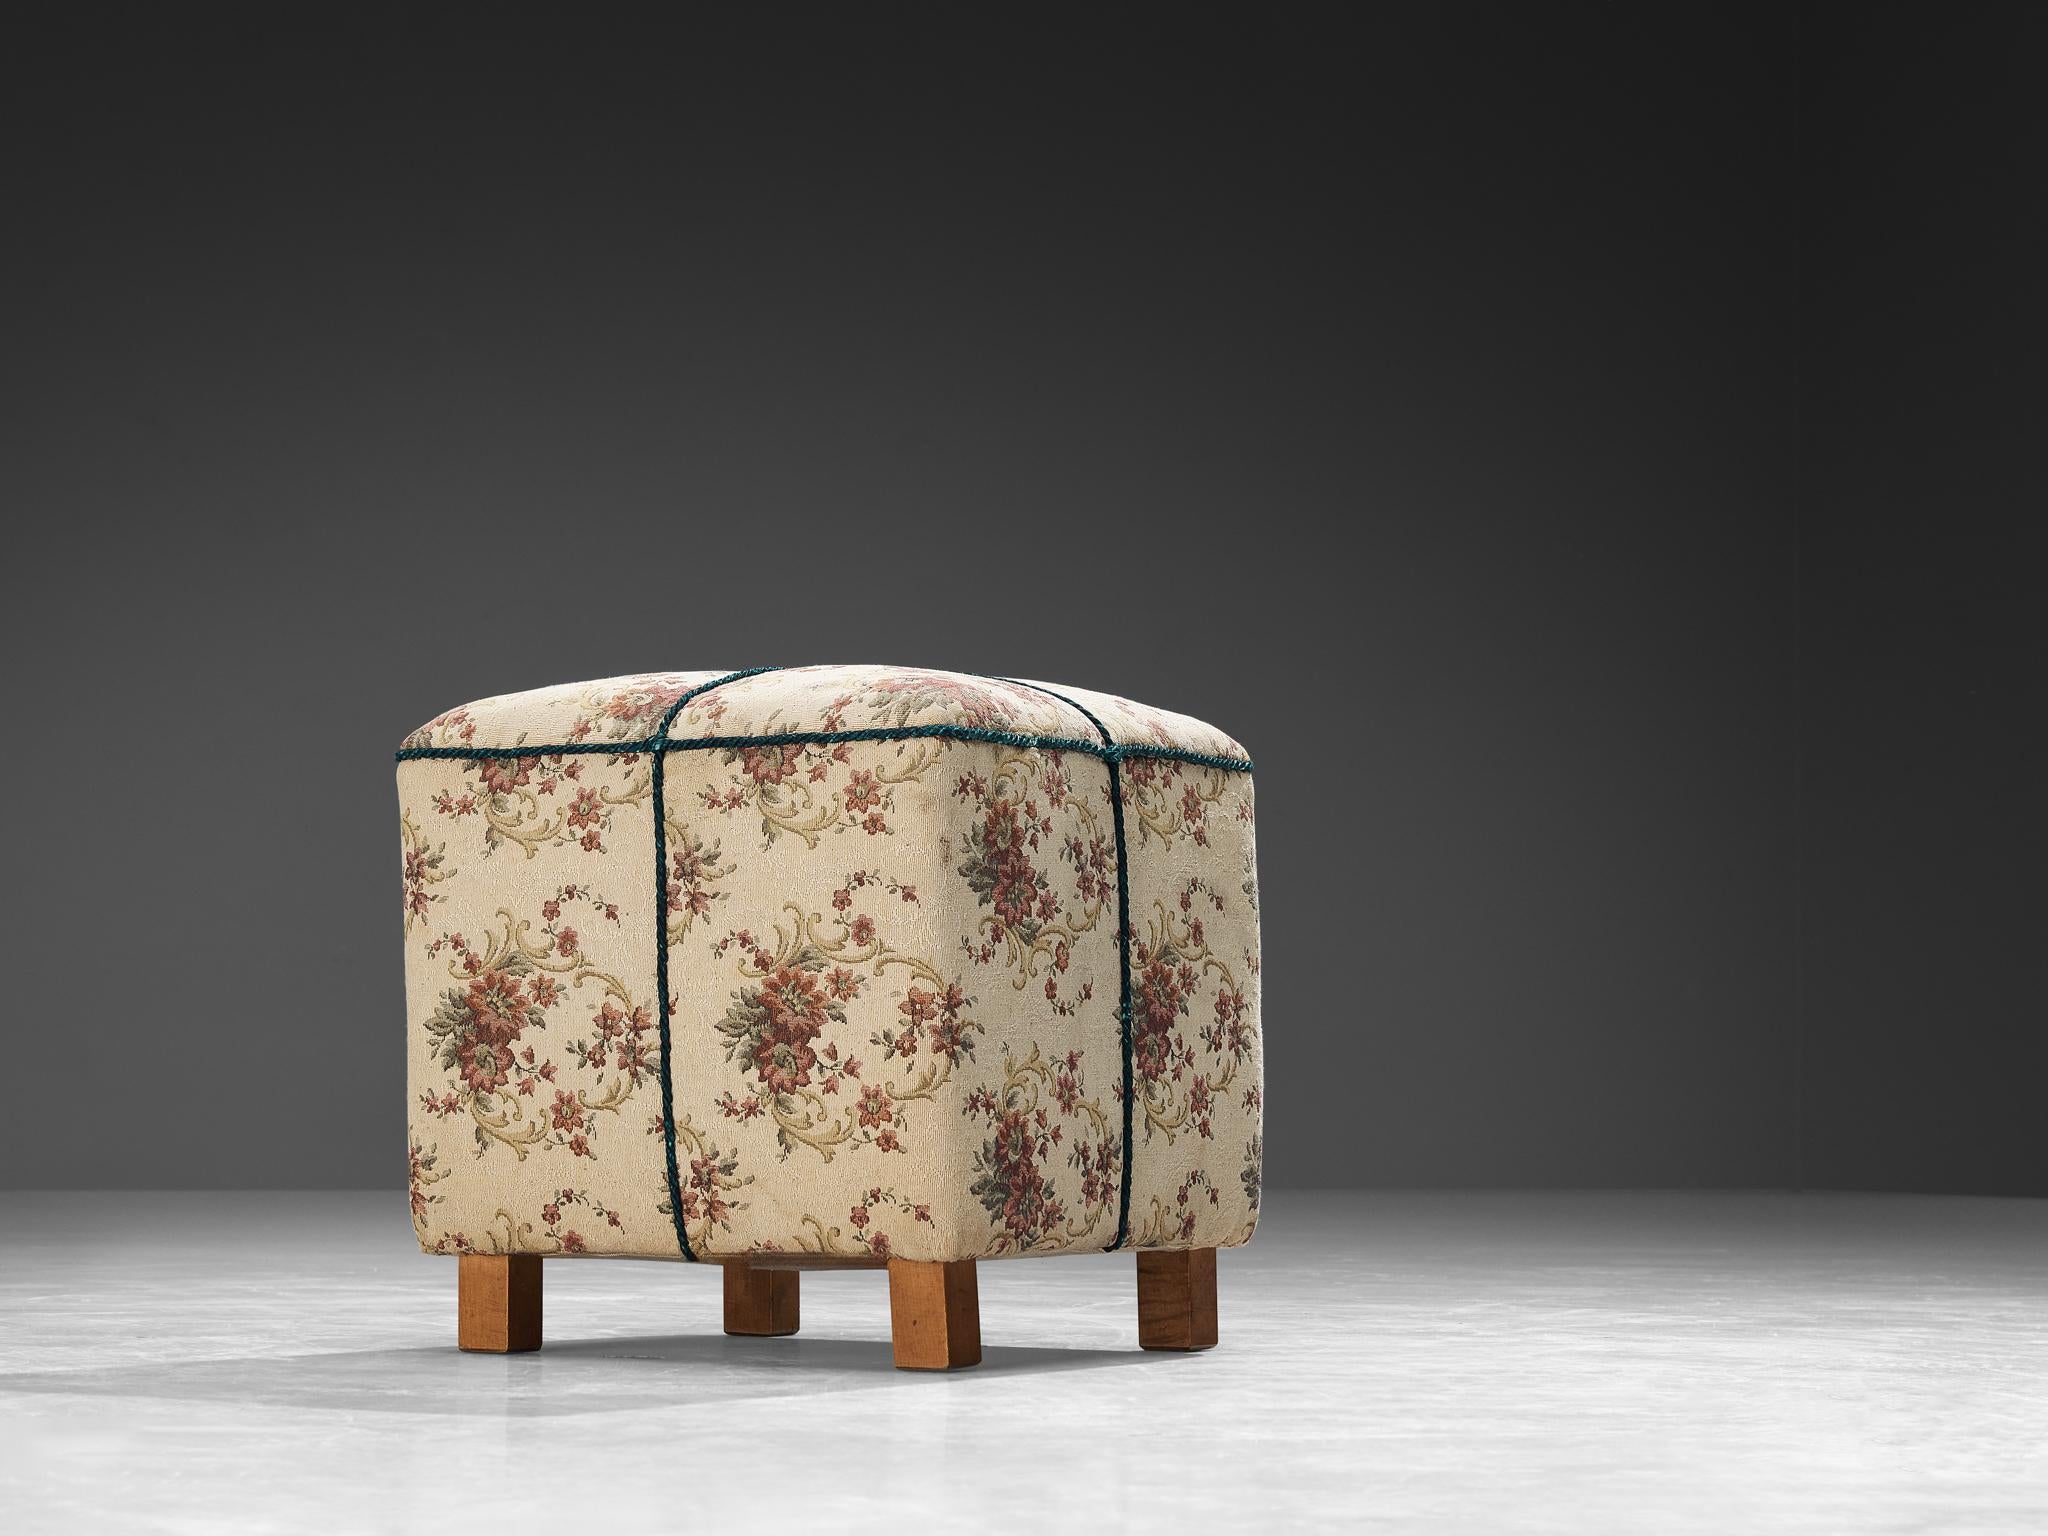 Jindrich Halabala Stool in Decorative Floral Upholstery